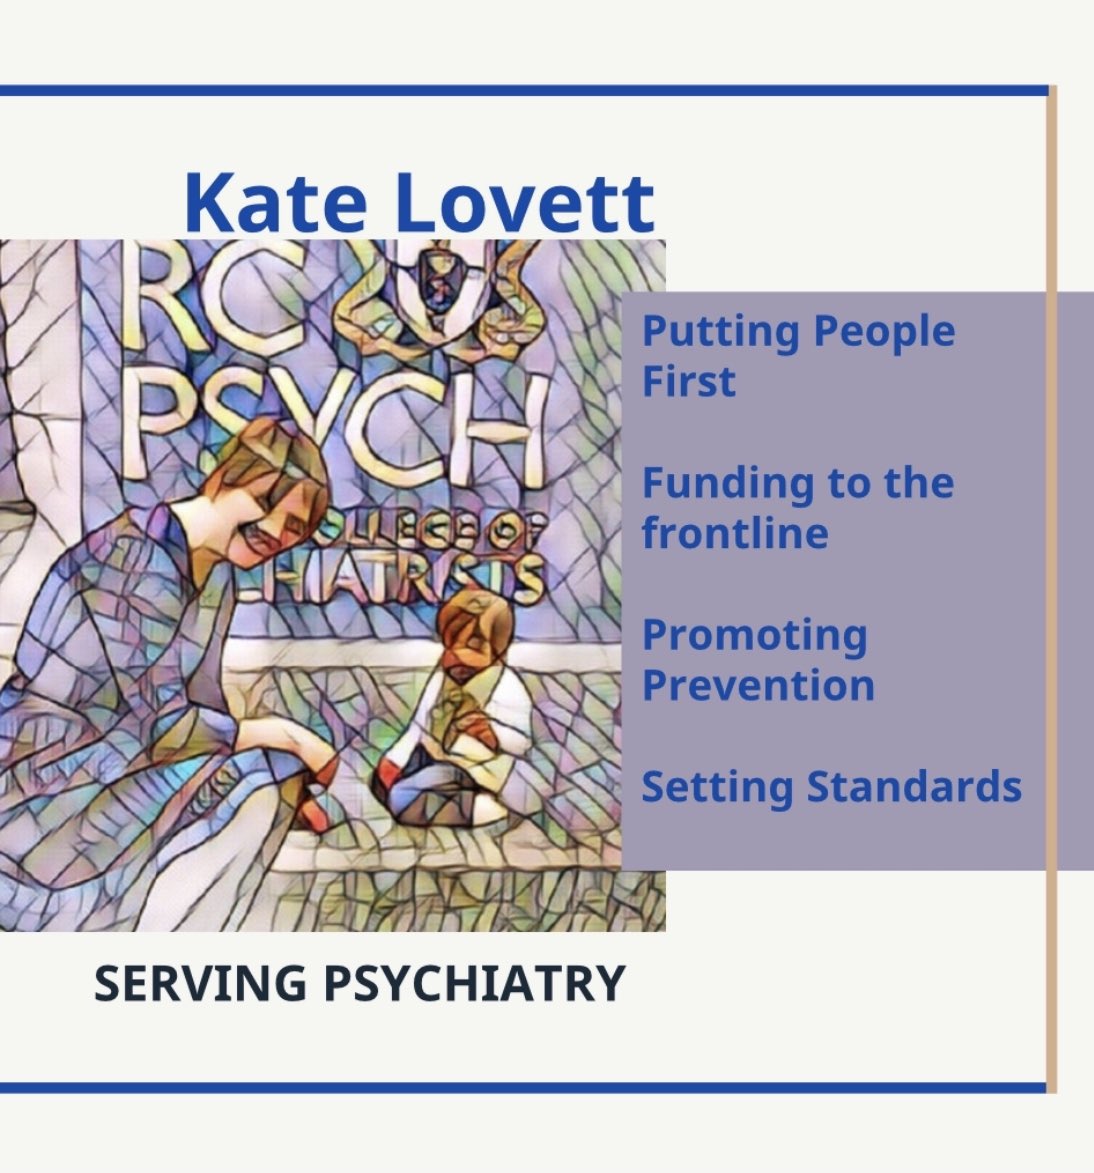 Voting opens today. You can read more about @rcpsych presidential elections and view my performance at hustings, election statement, video and written answers to wide ranging questions put by college members #RCPsychPresident #VoteKate rcpsych.ac.uk/about-us/our-p…